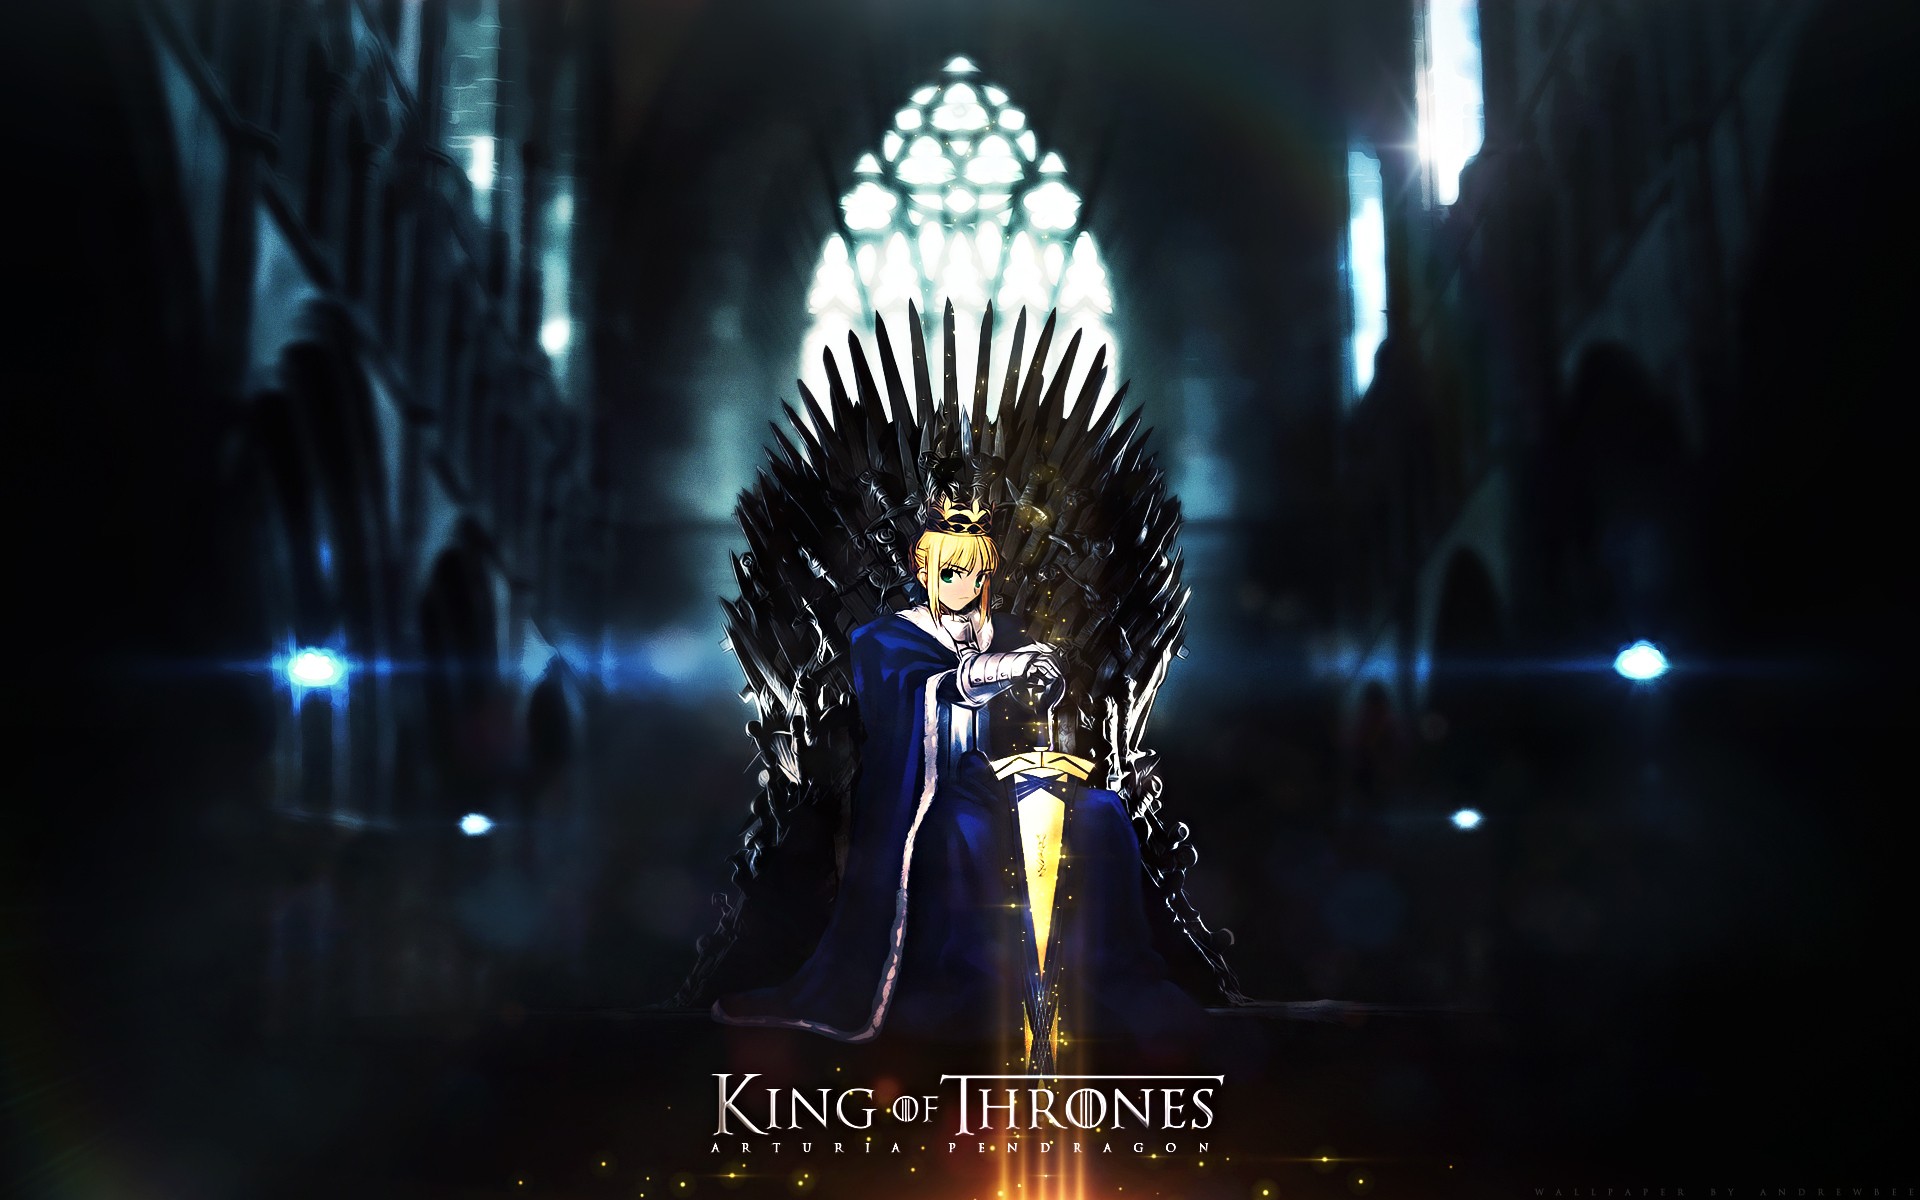 blondes, Fatestay, Night, King, Game, Of, Thrones, Anime, Girls, Fate, Series, Thrones Wallpaper